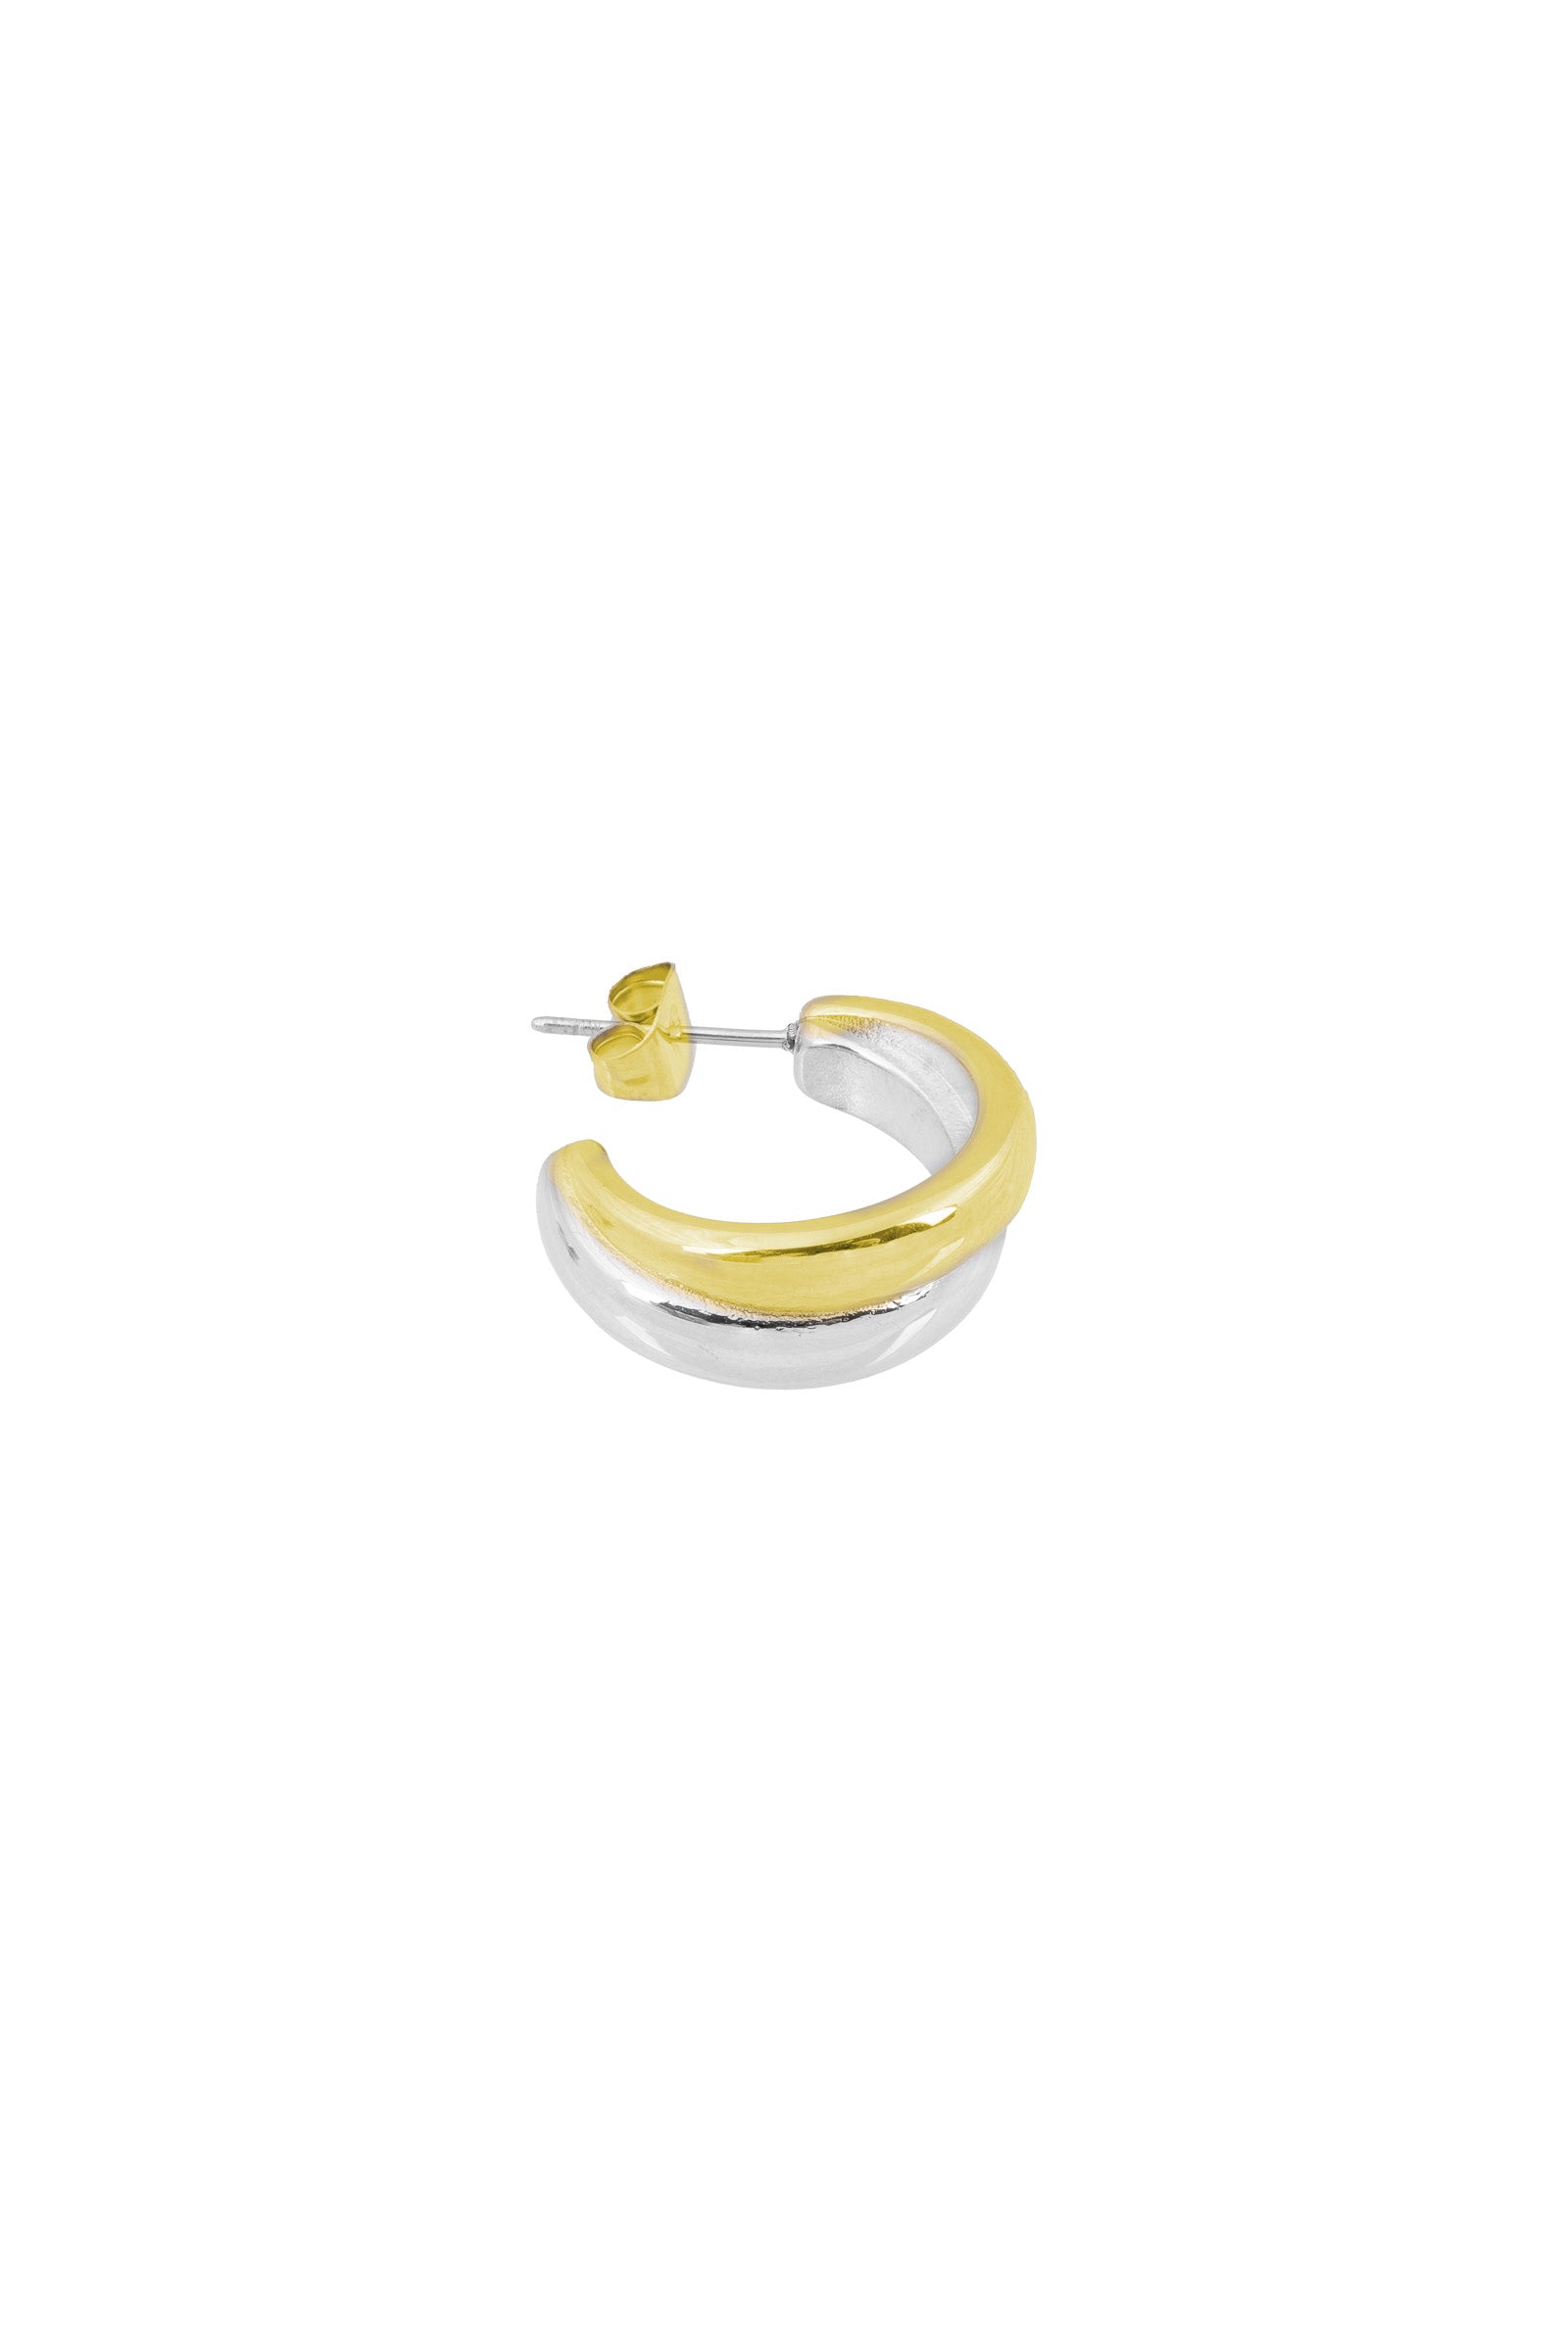 Bandhu Better Together Earrings - Gold / Silver - RUM Amsterdam